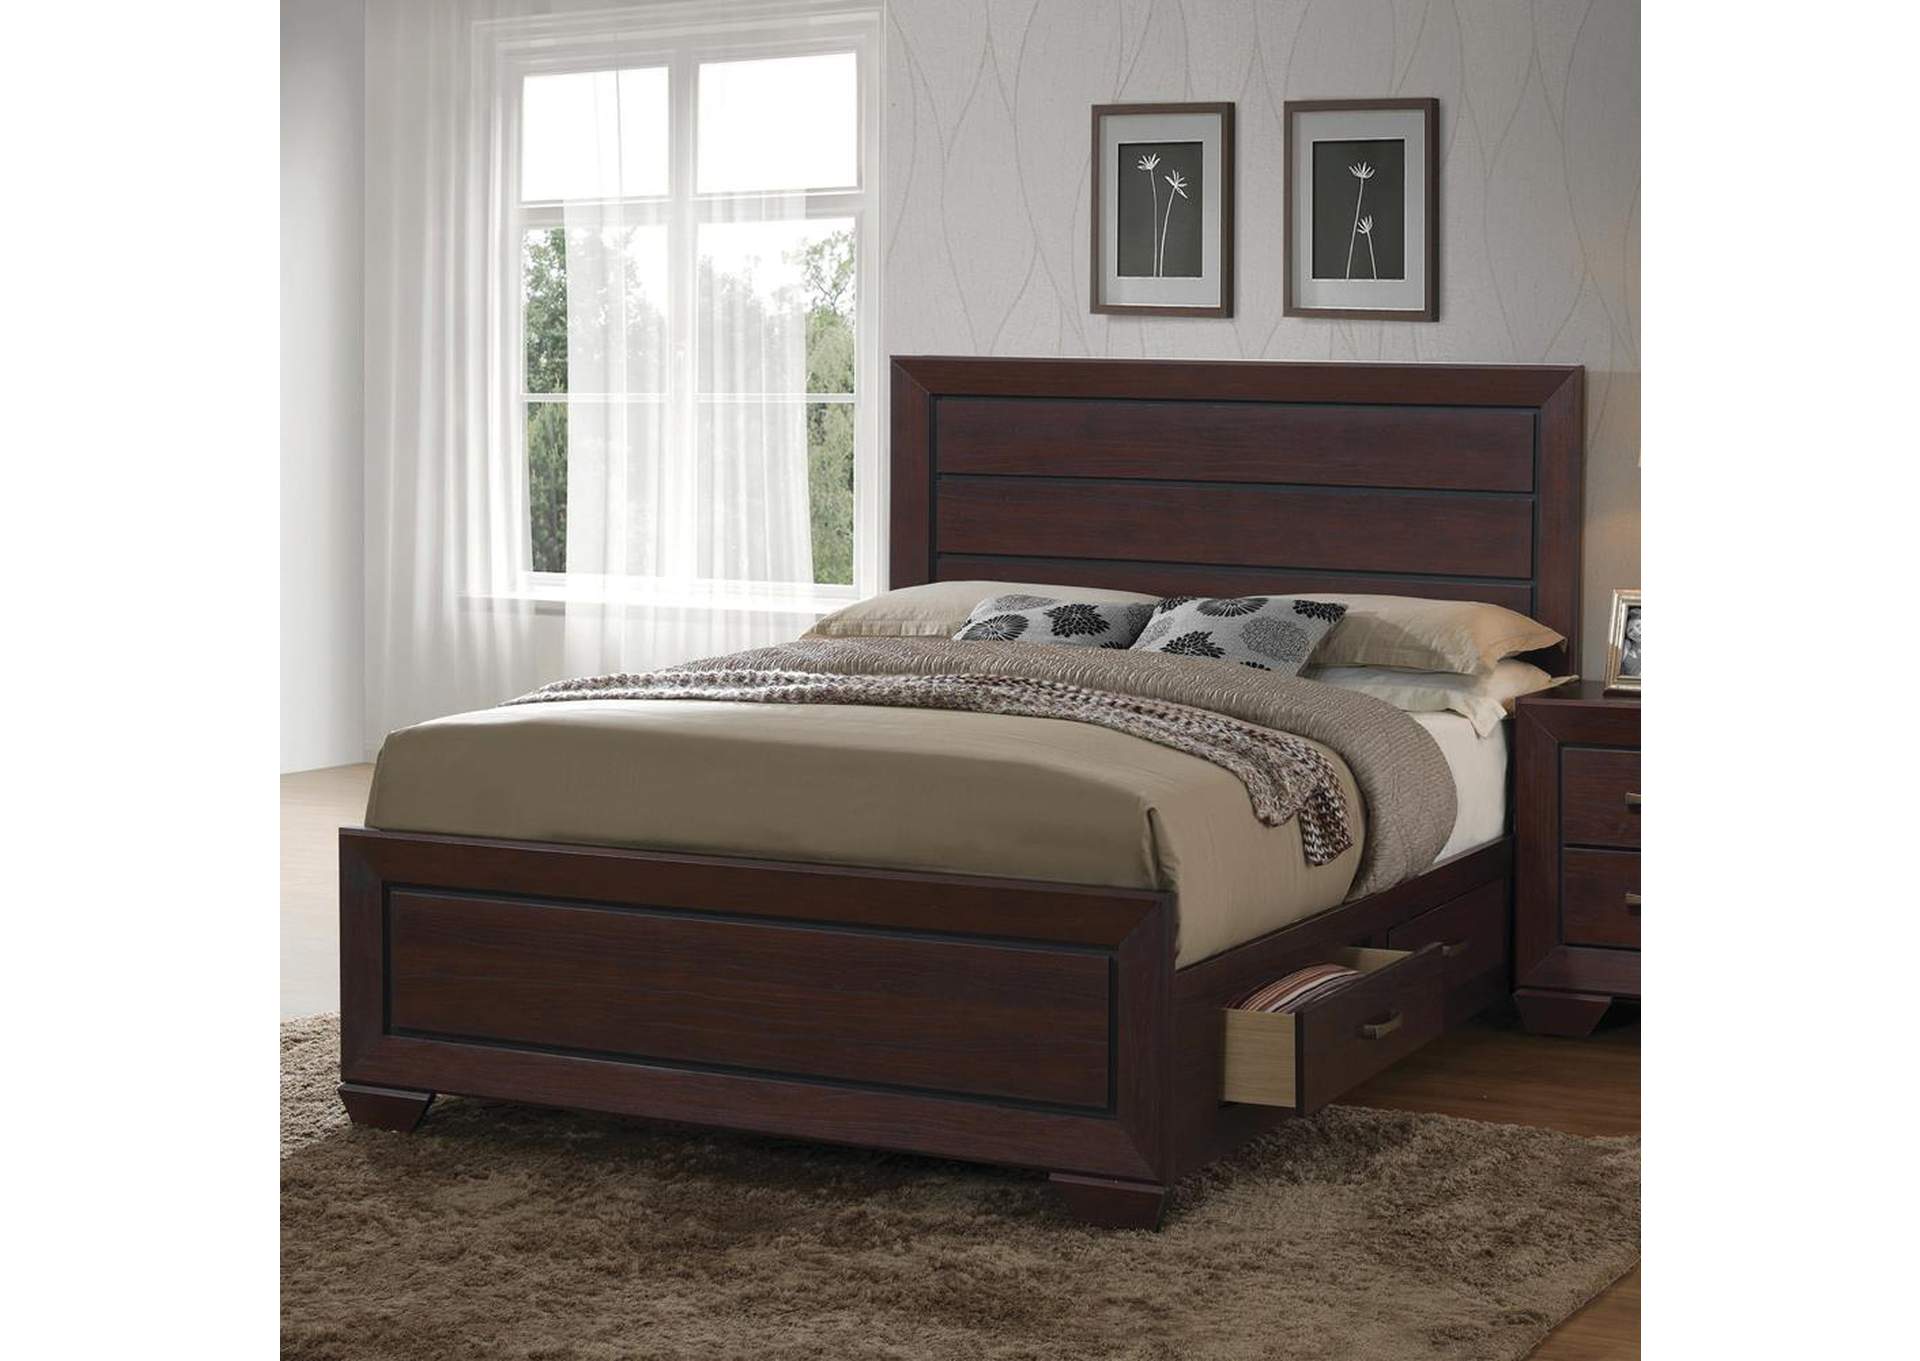 Fenbrook Transitional Dark Cocoa Queen Bed,Coaster Furniture